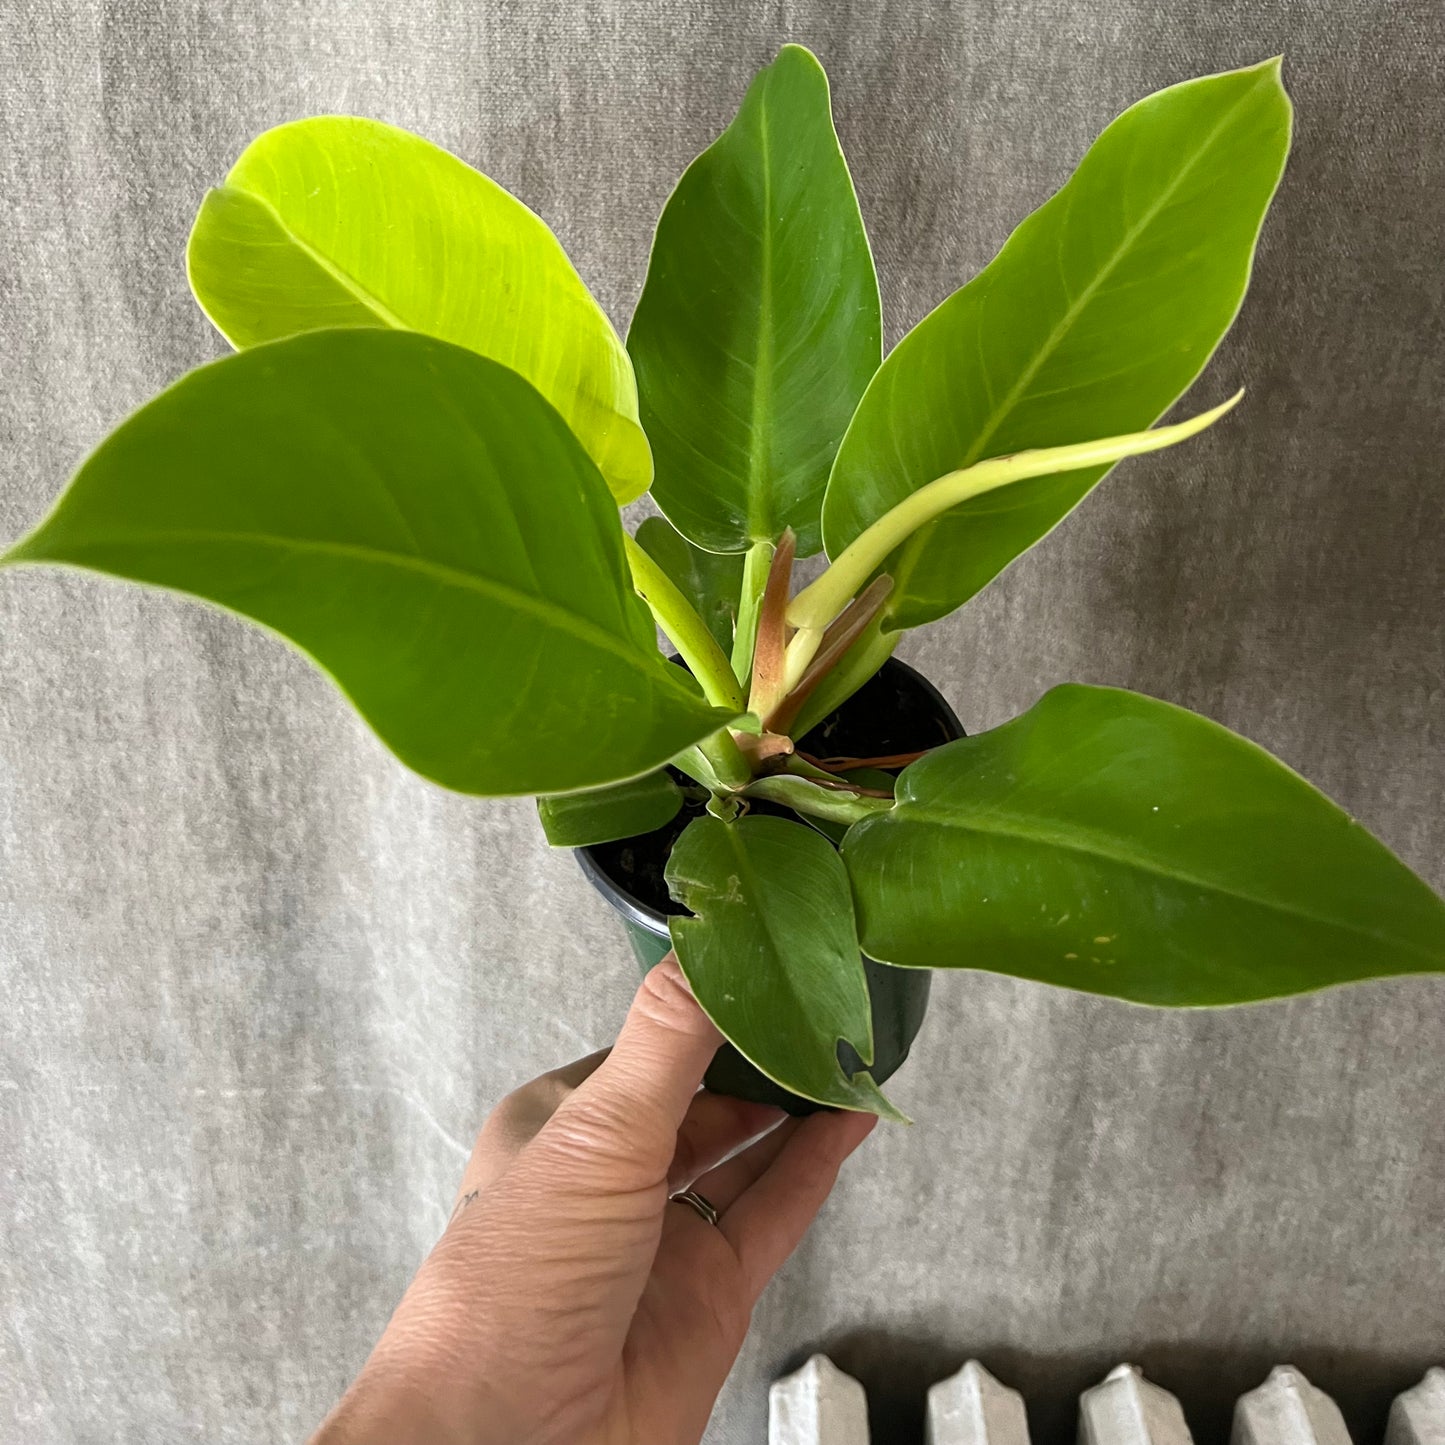 4" Golden Melinonii Philodendron